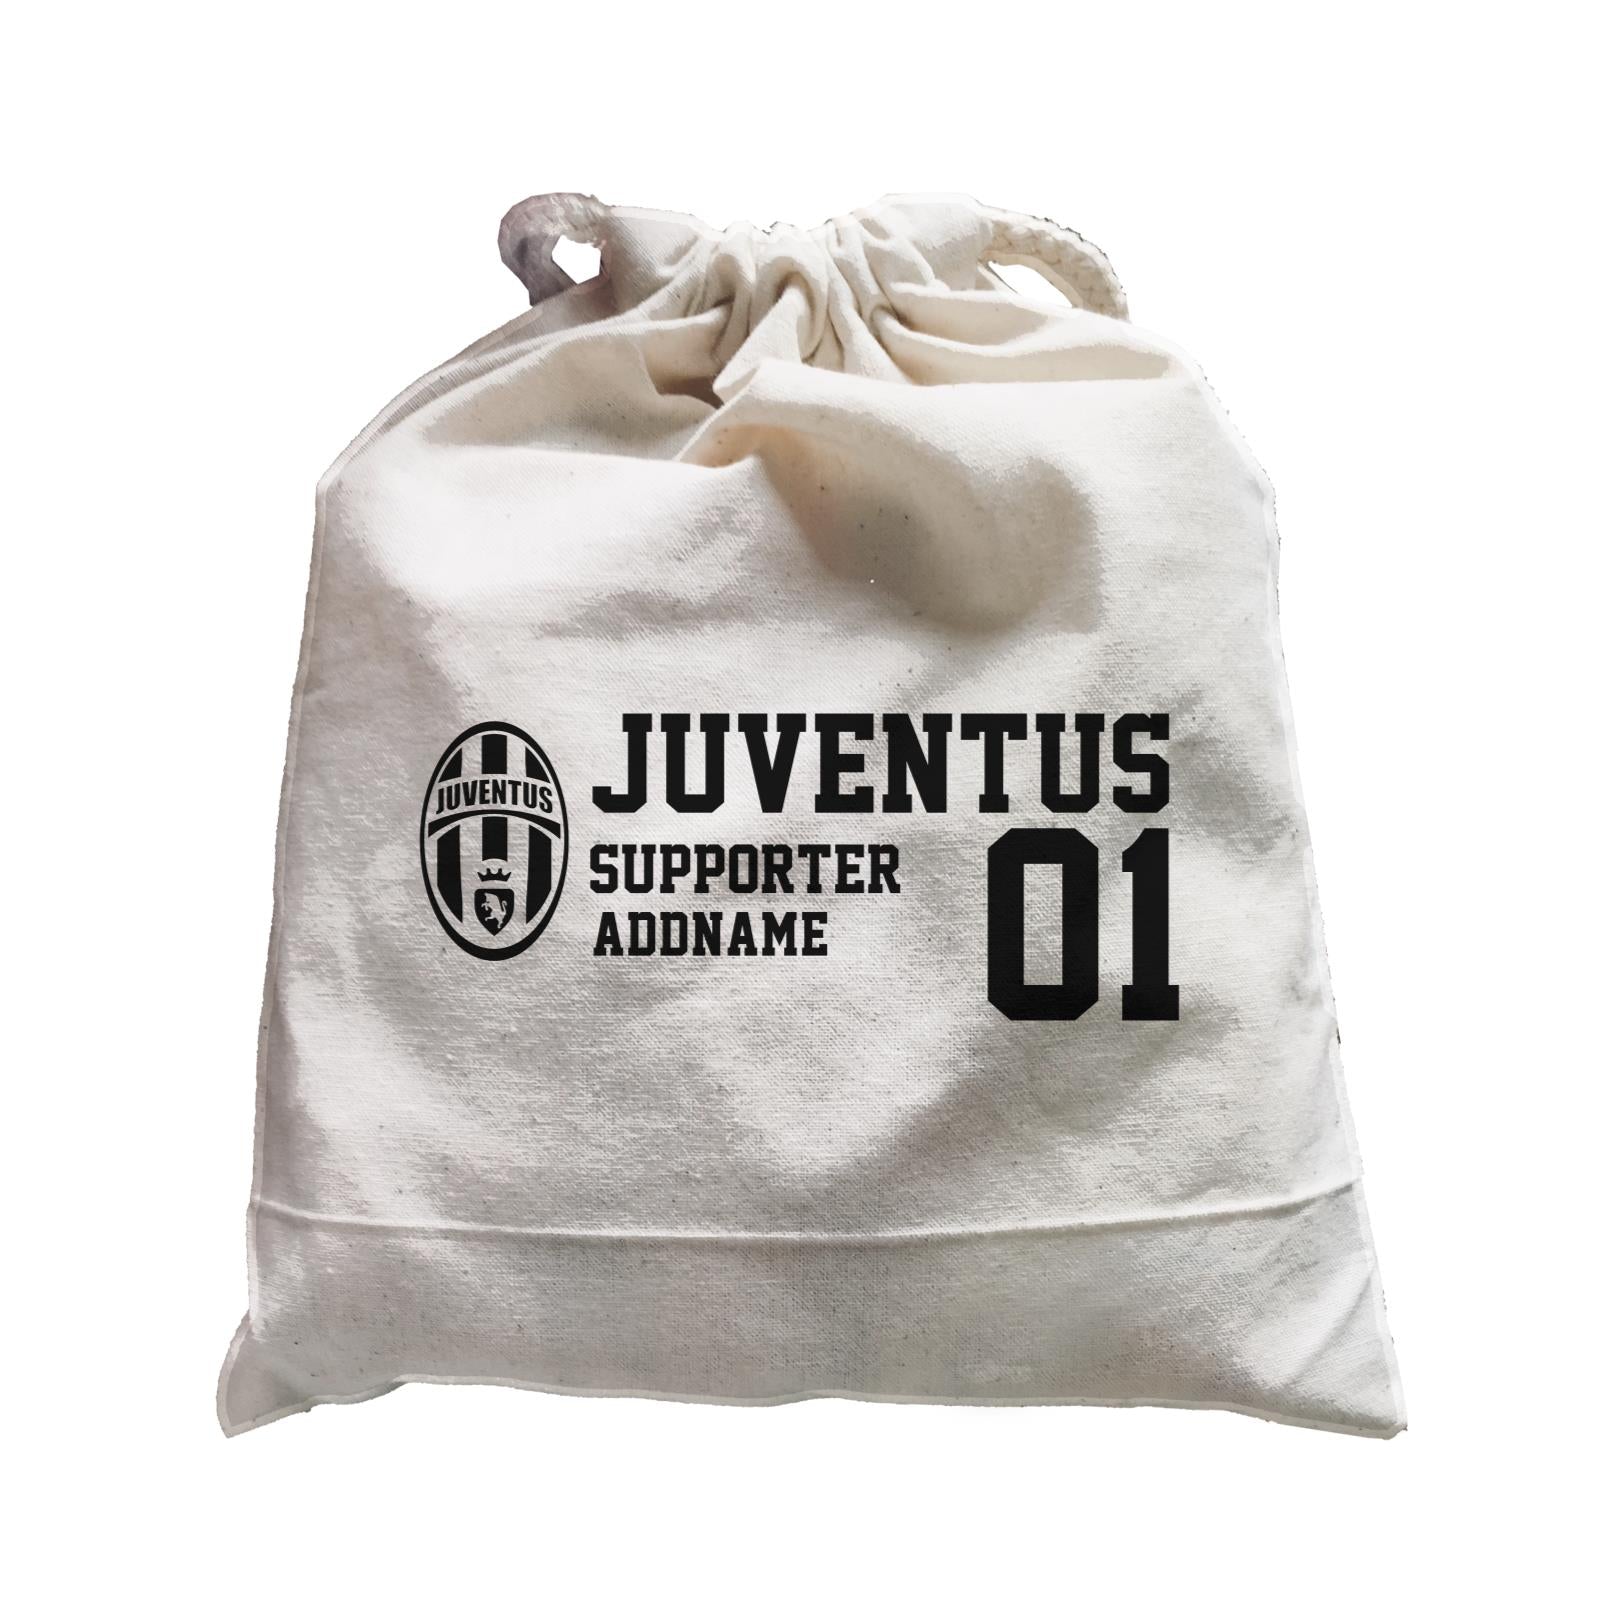 Juventus Football Supporter Accessories Addname Satchel